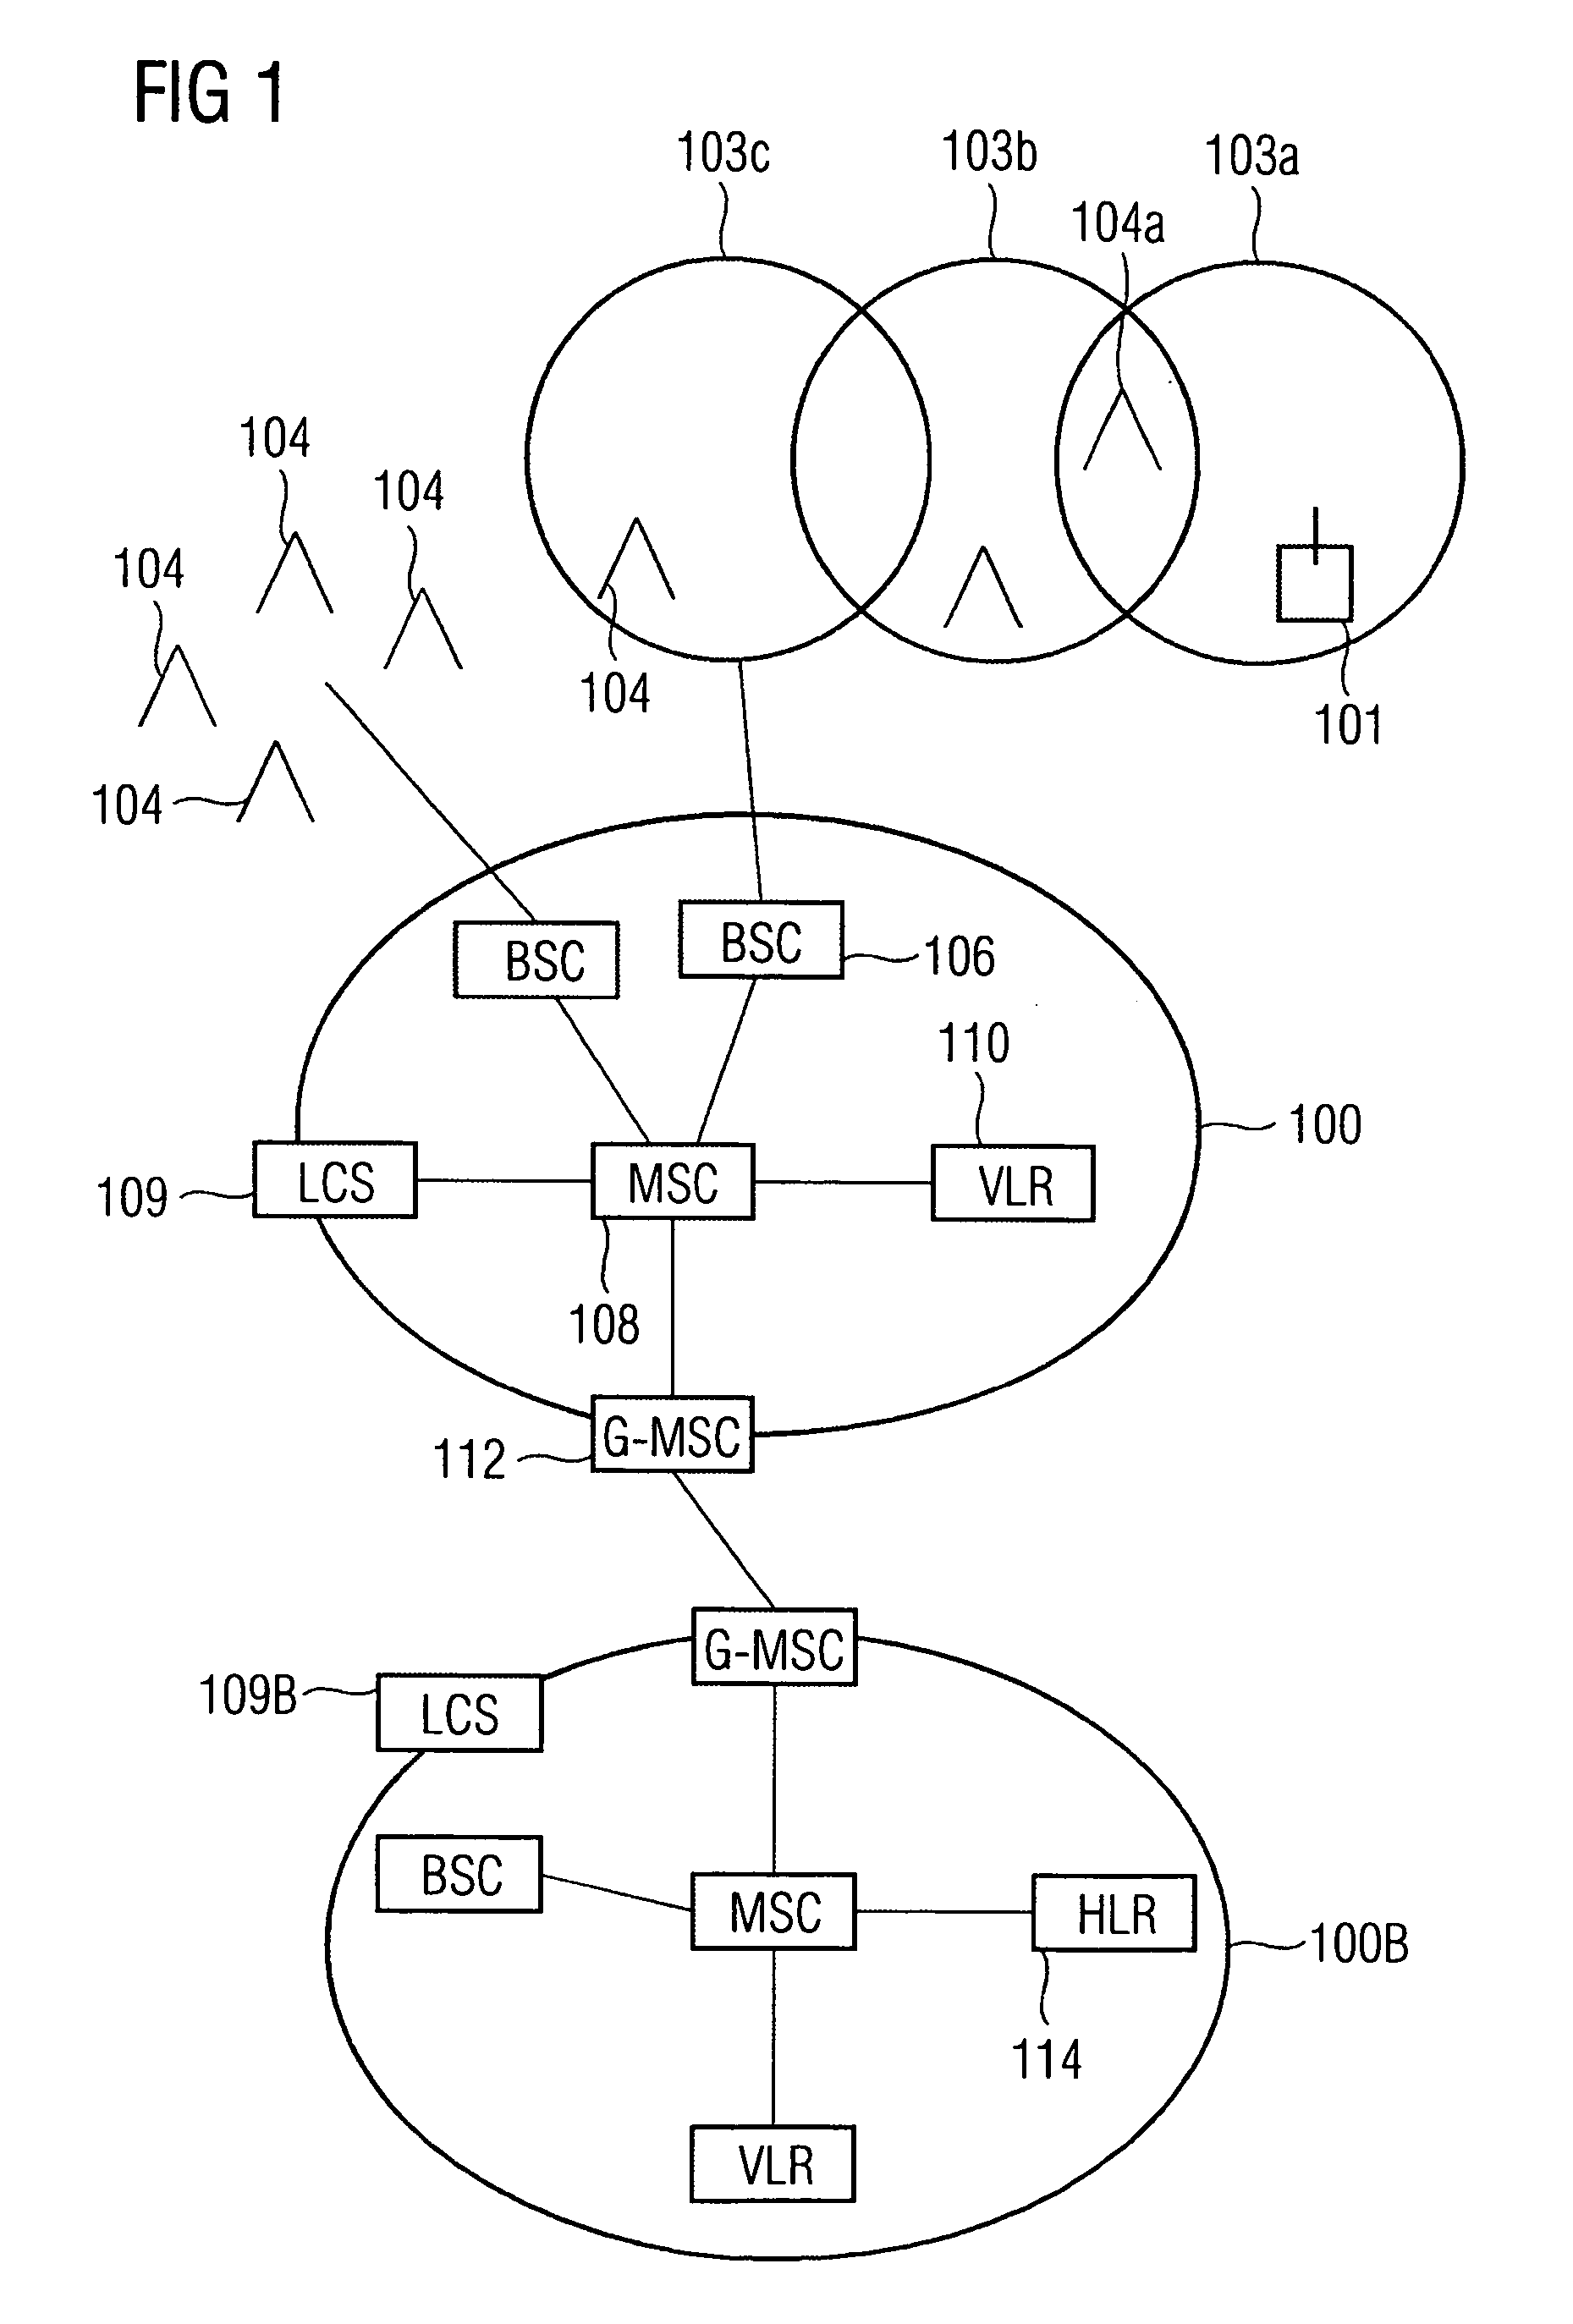 Device and method for forming a set of cells for time difference measurements, and for measuring time differences for locating a user of a mobile terminal